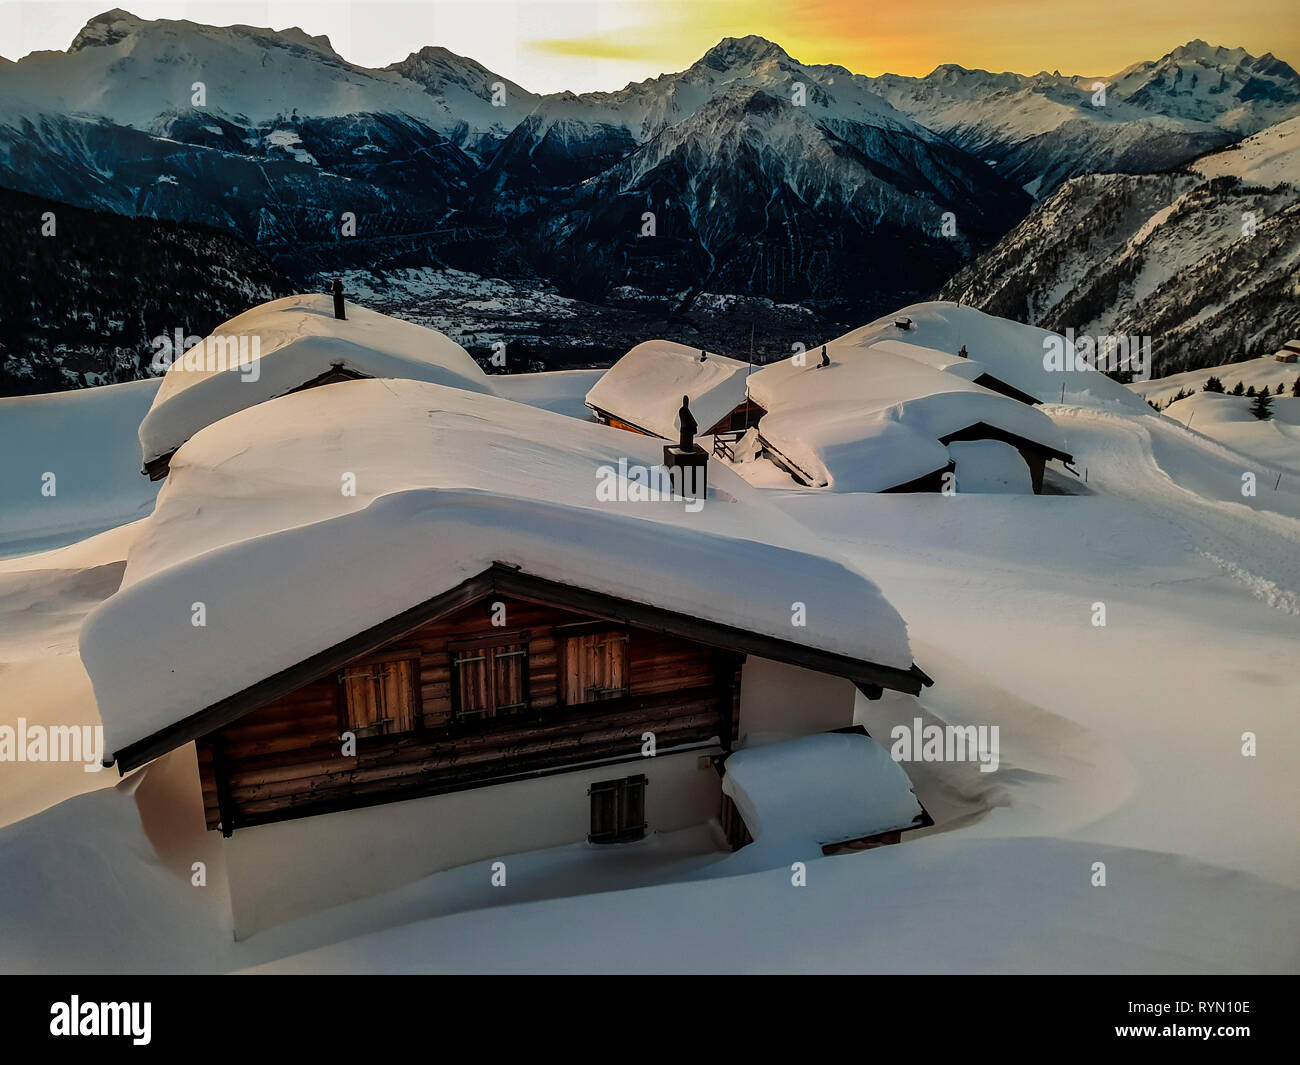 Landscape view of the slopes of the ski resort of Verbier in Switzerland, shot in winter 2019 Stock Photo